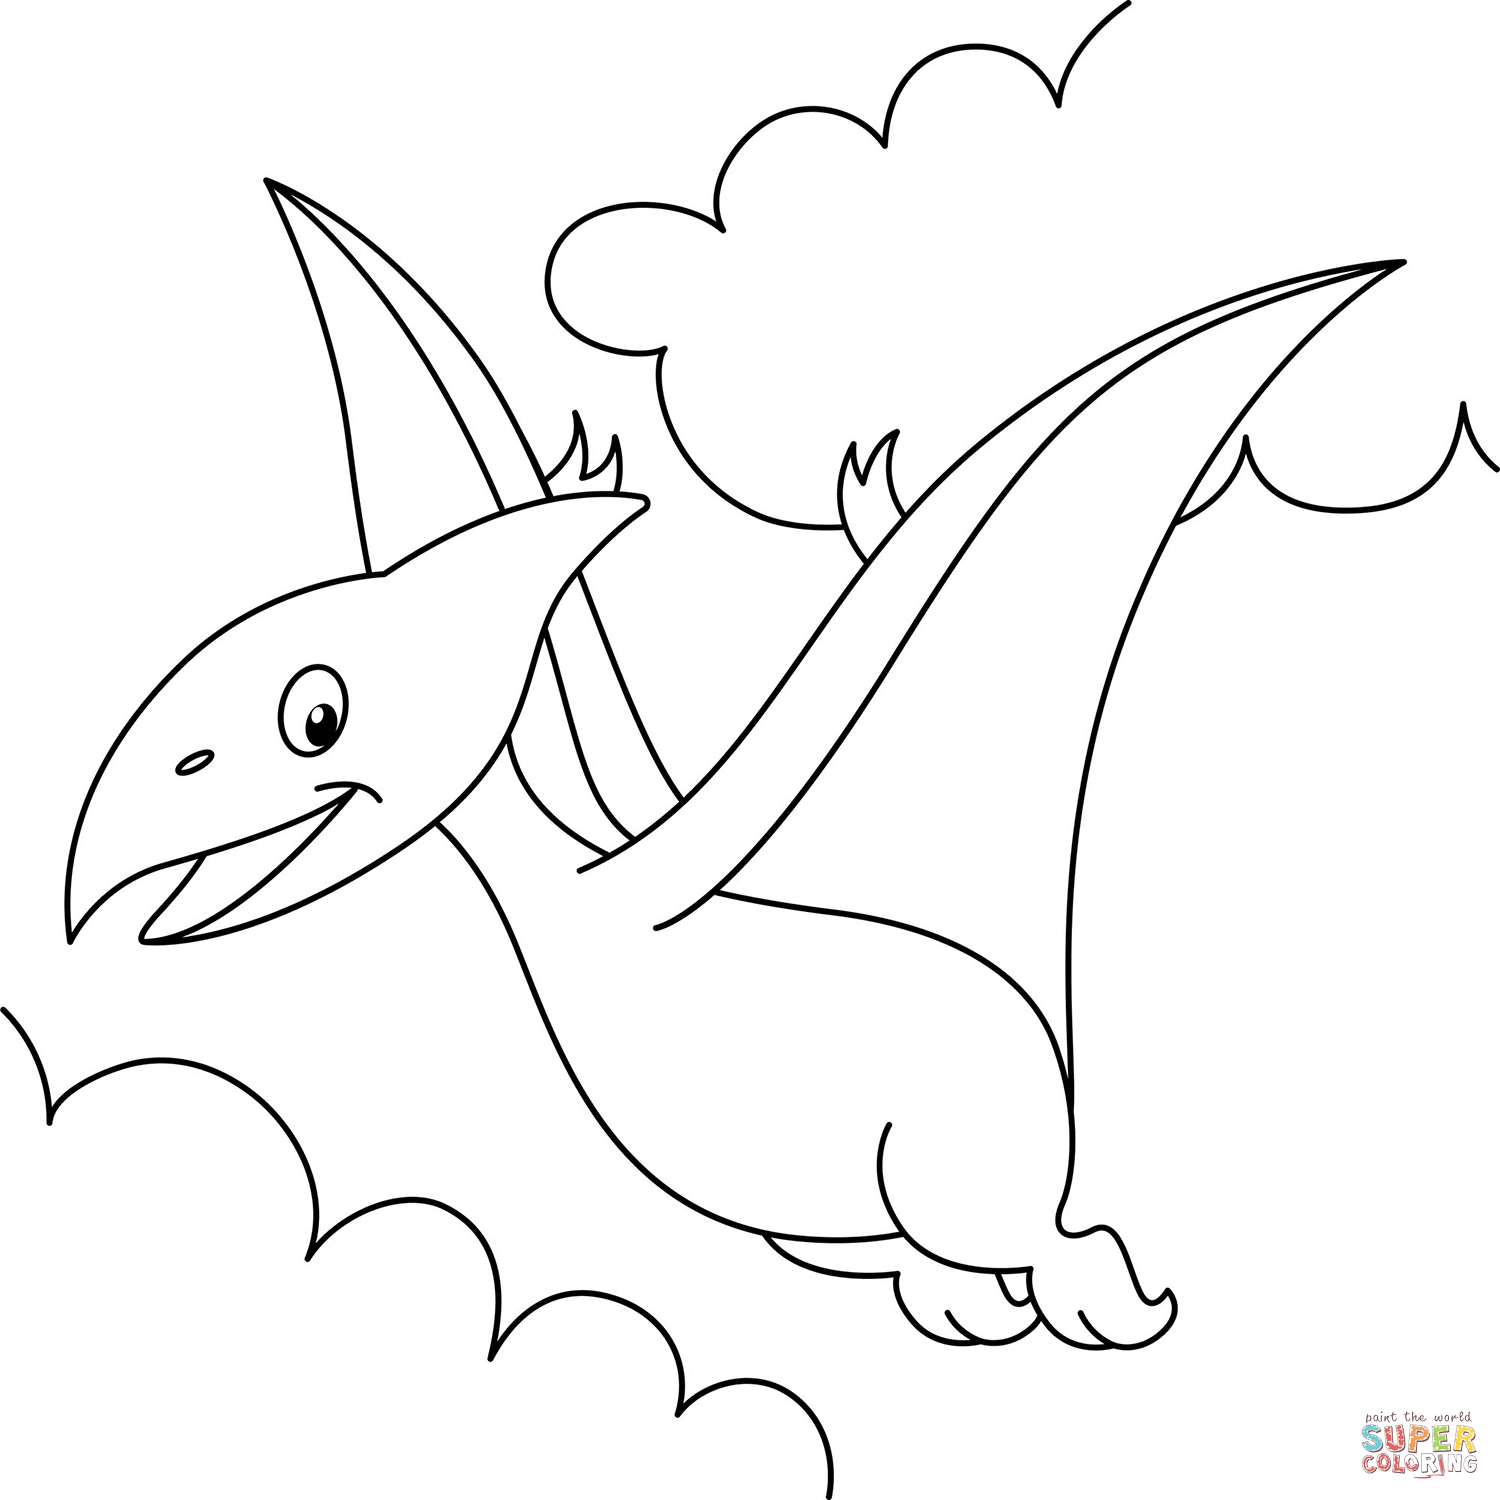 Cute pterodactyl coloring page free printable coloring pages